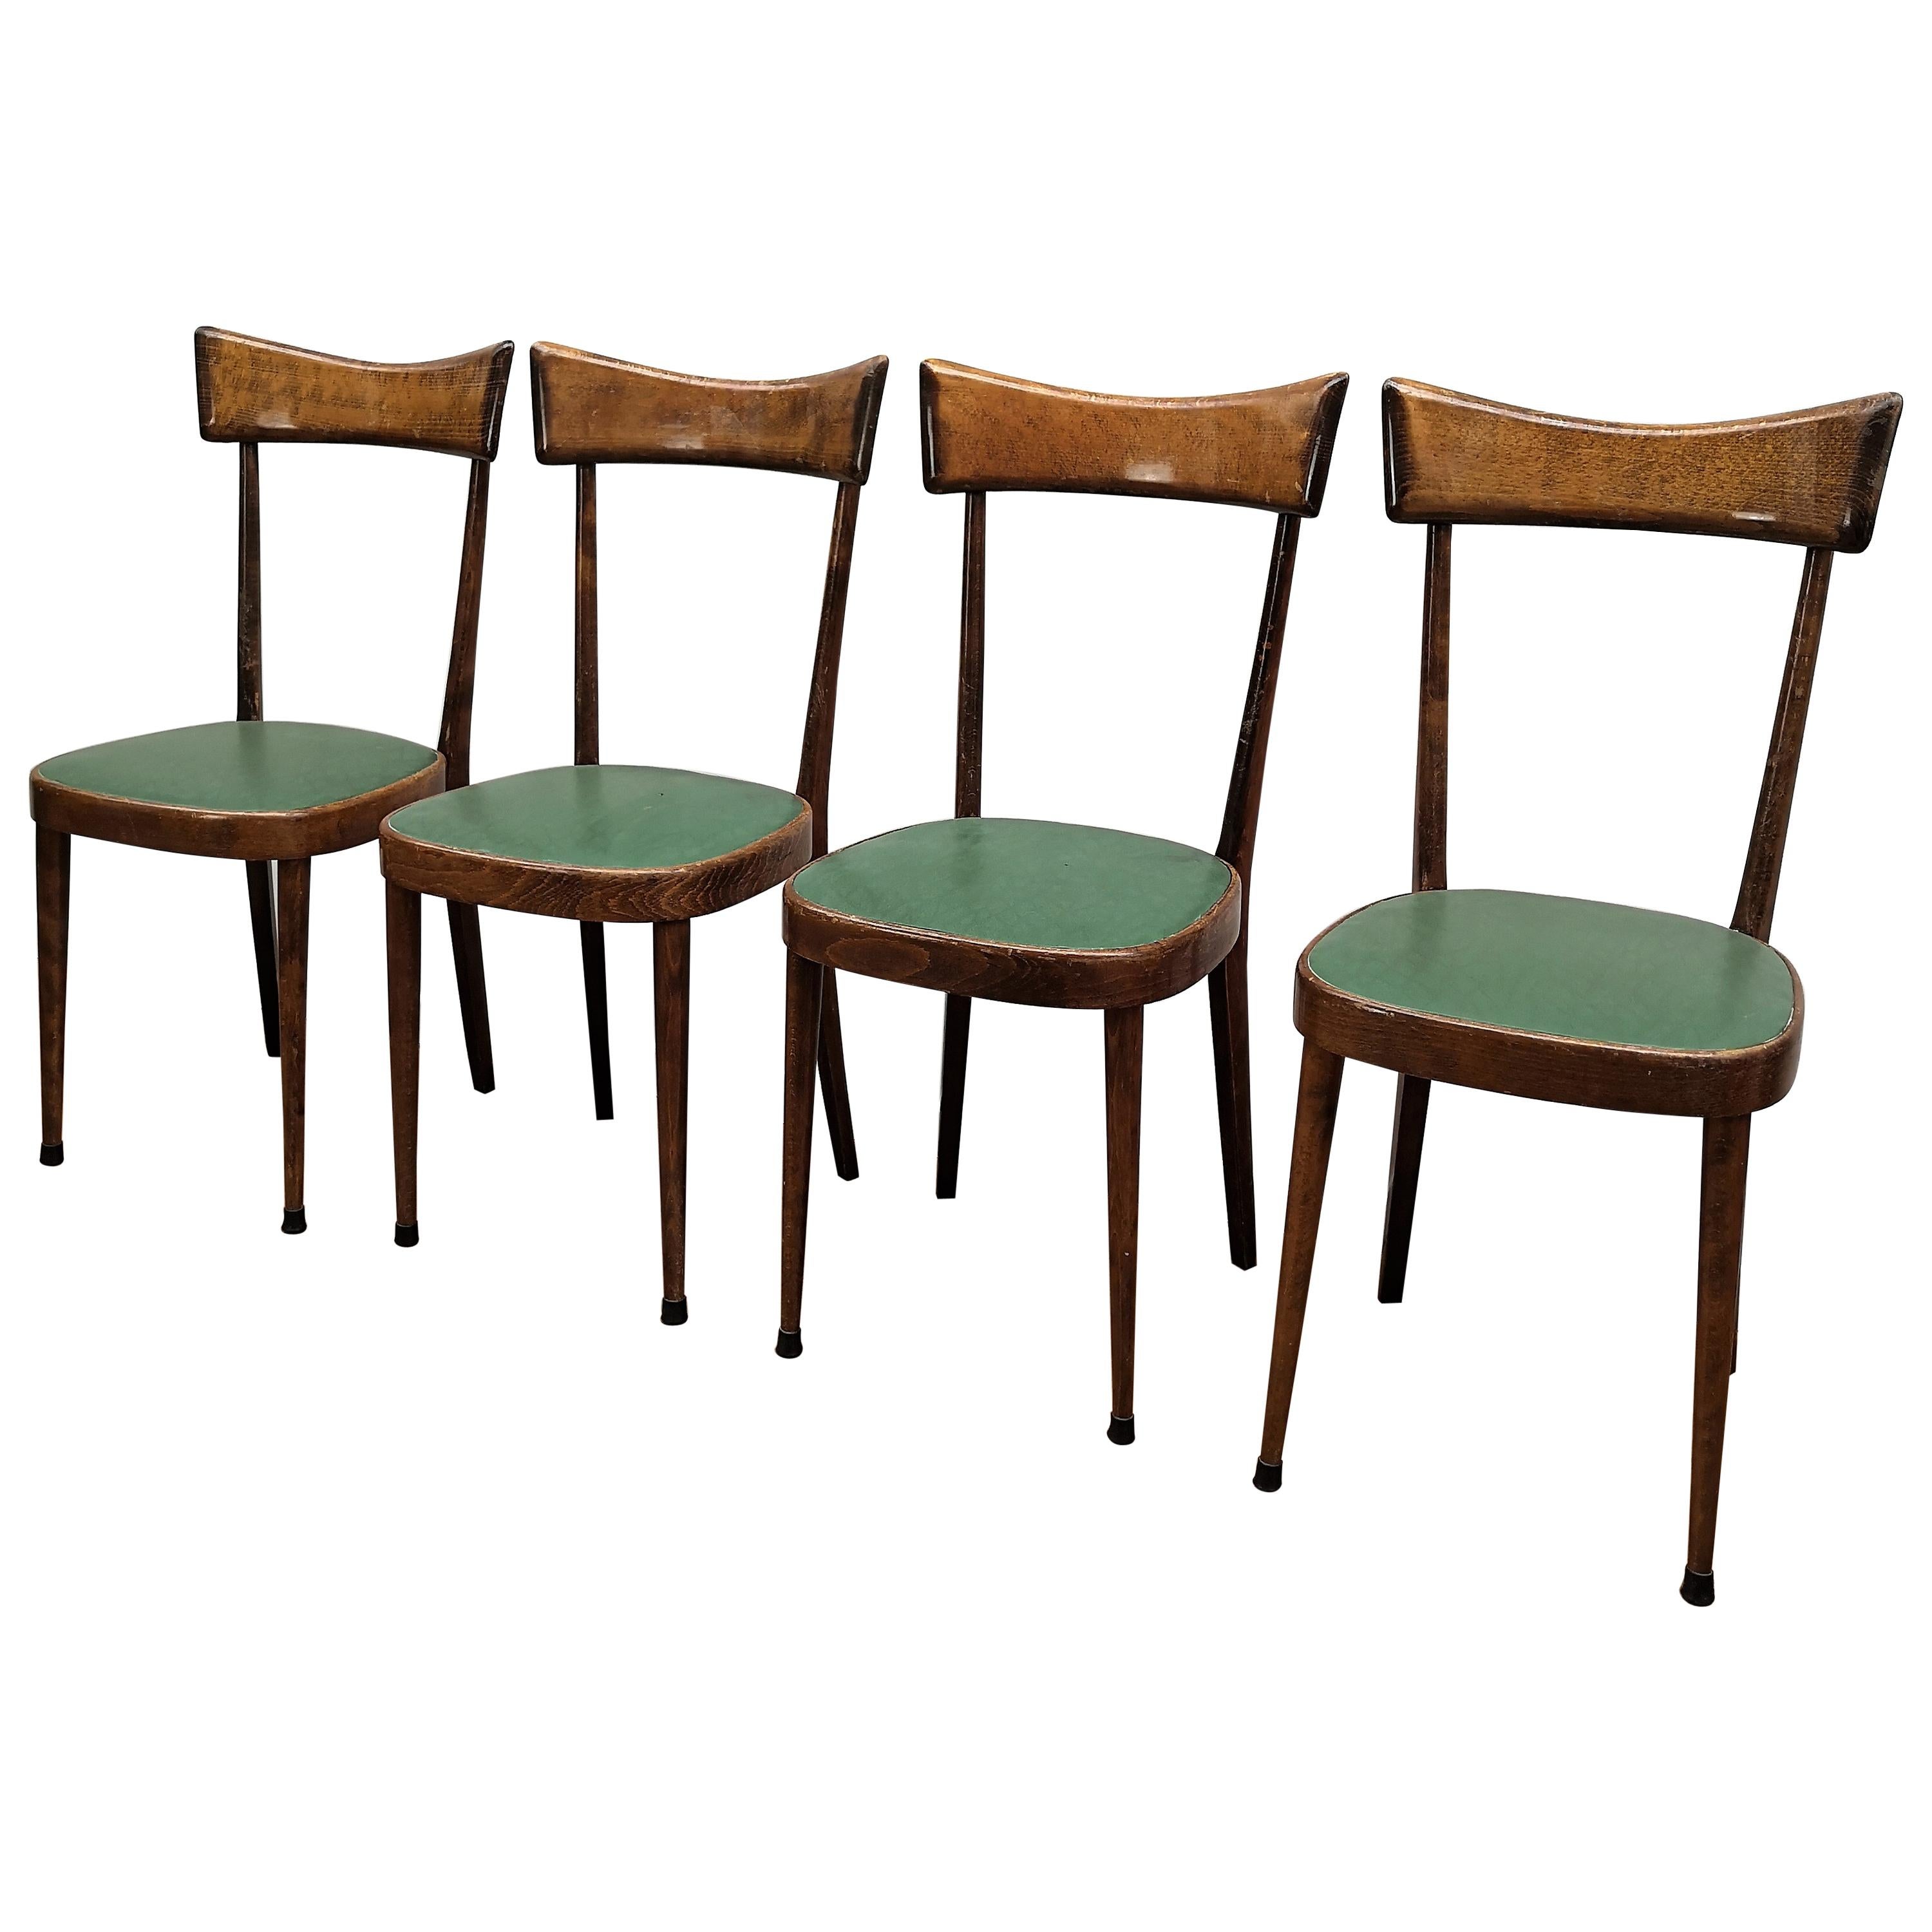 Set of Four 1950s Italian Mid-Century Modern Dining Room Chairs